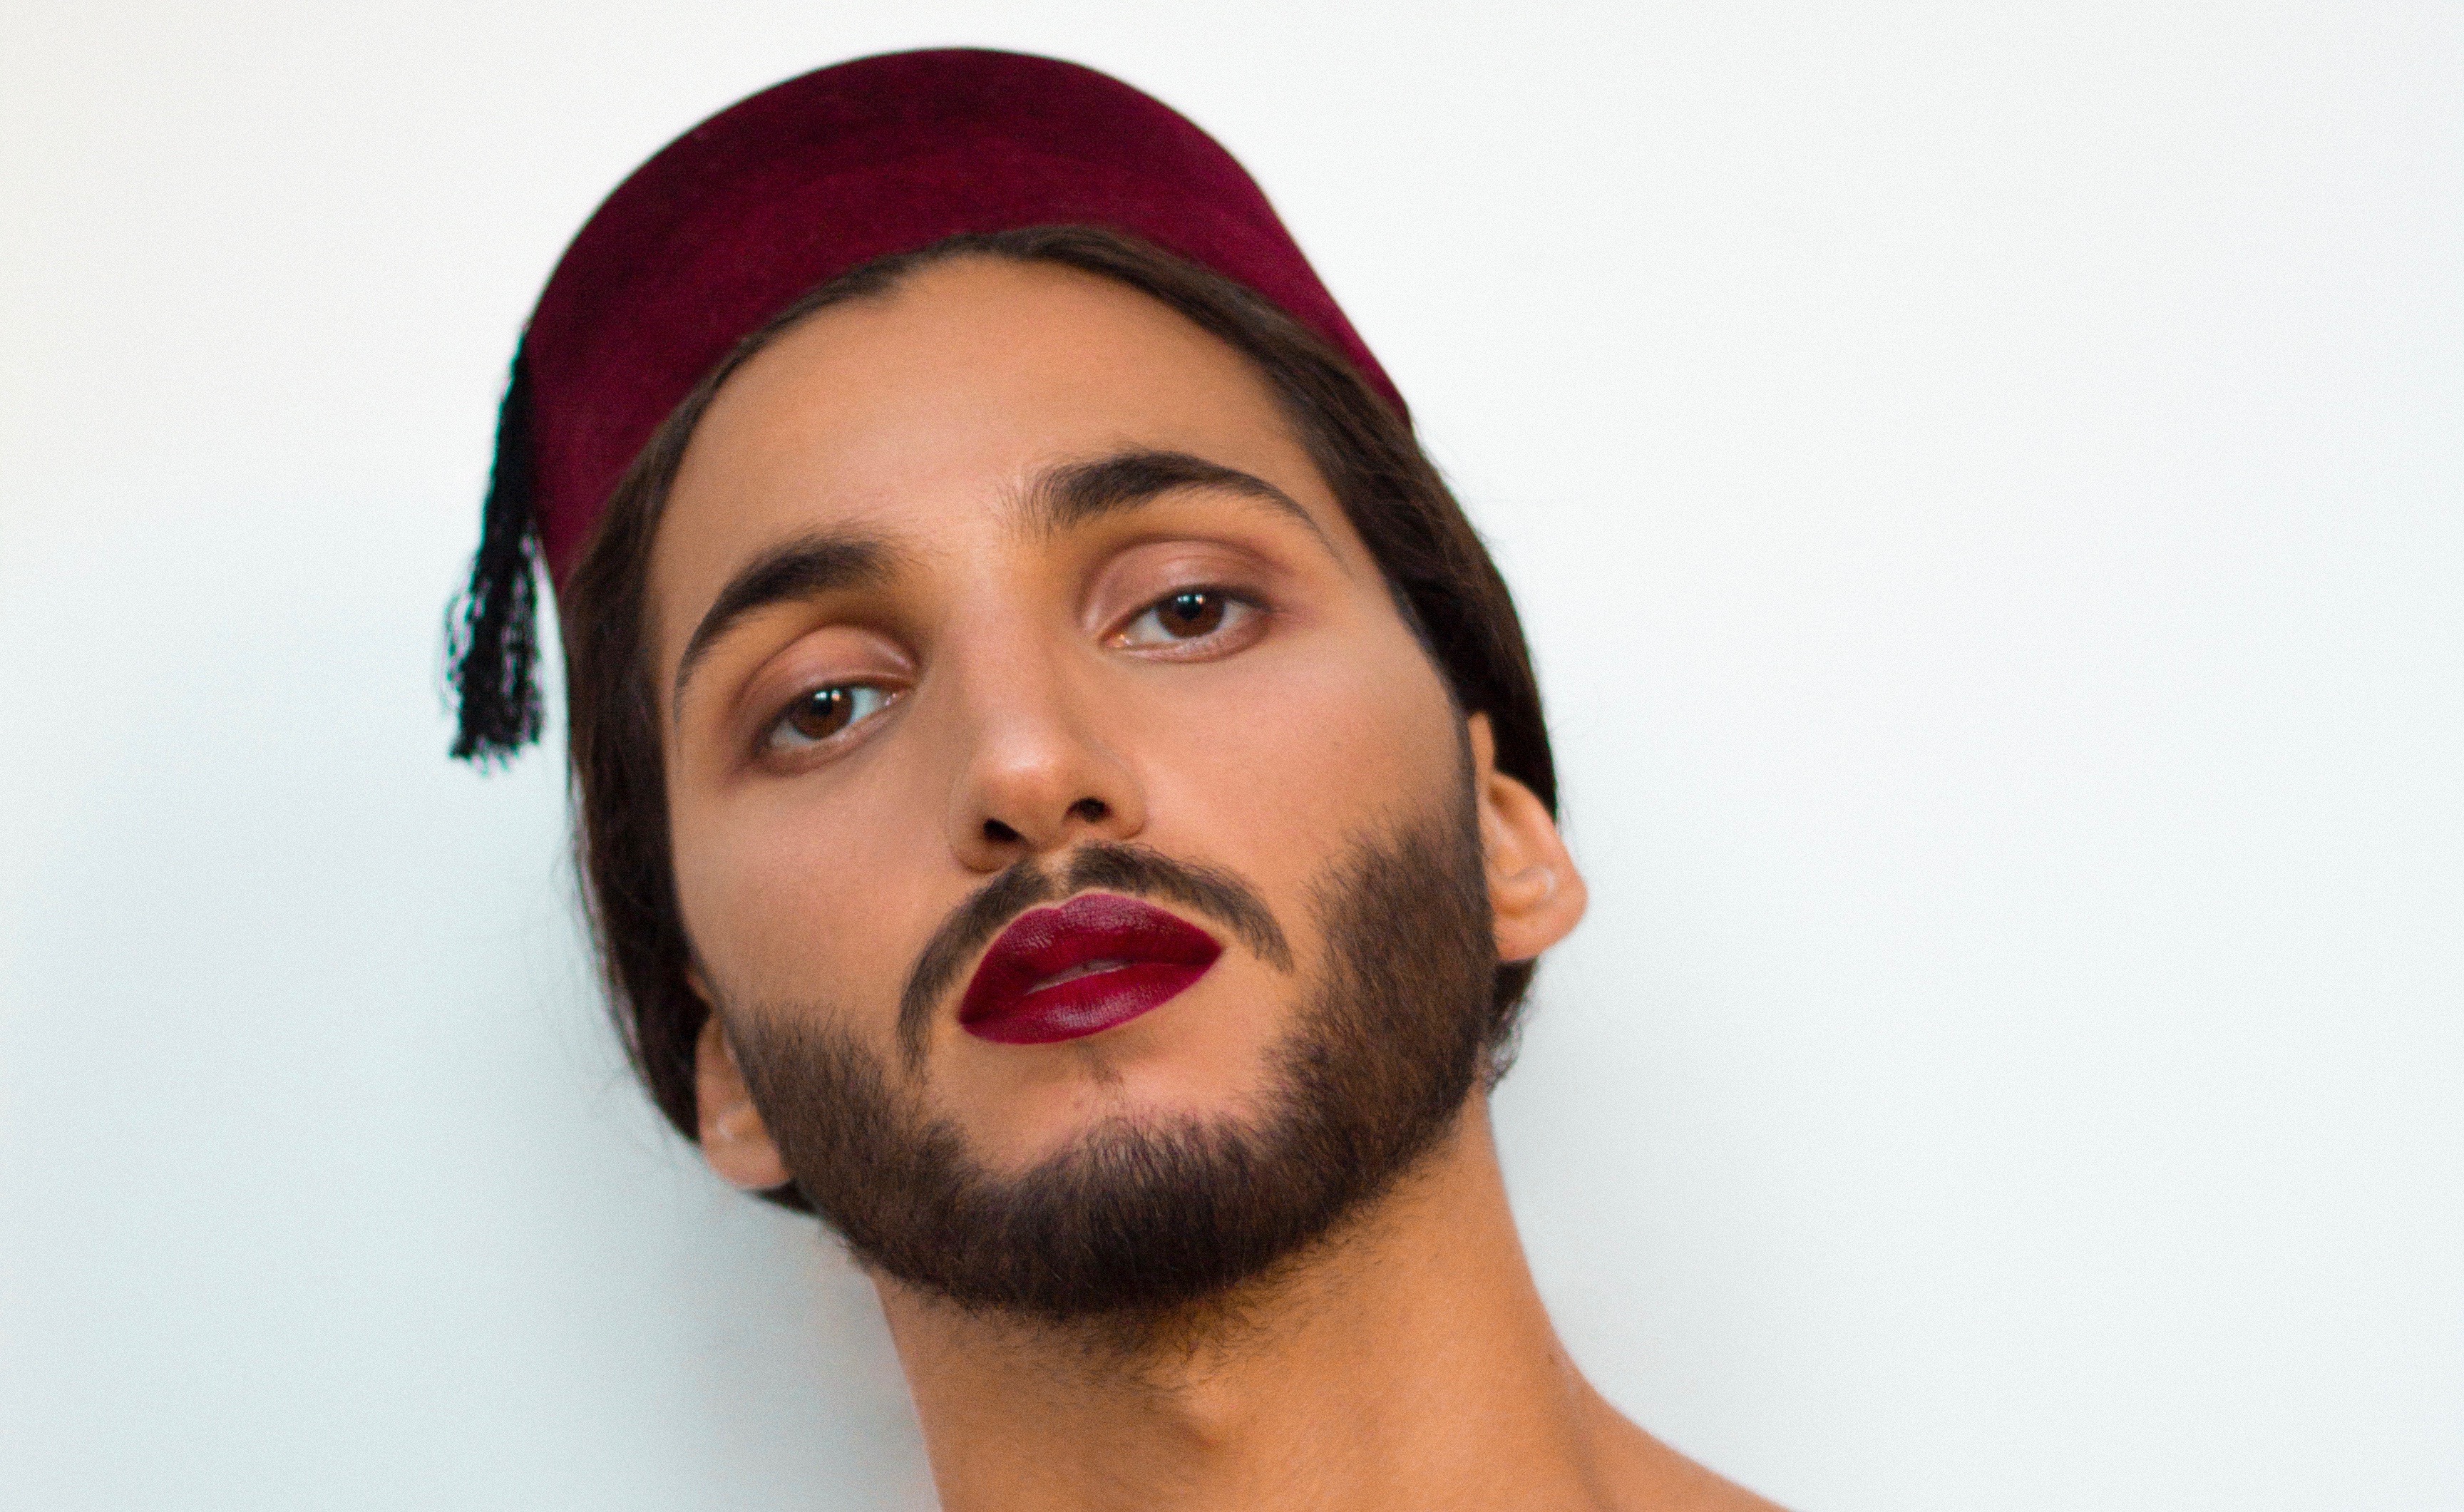 Moroccan-Canadian Singer Mehdi Bahmad's Debut Video is Appeal for Gender Liberation